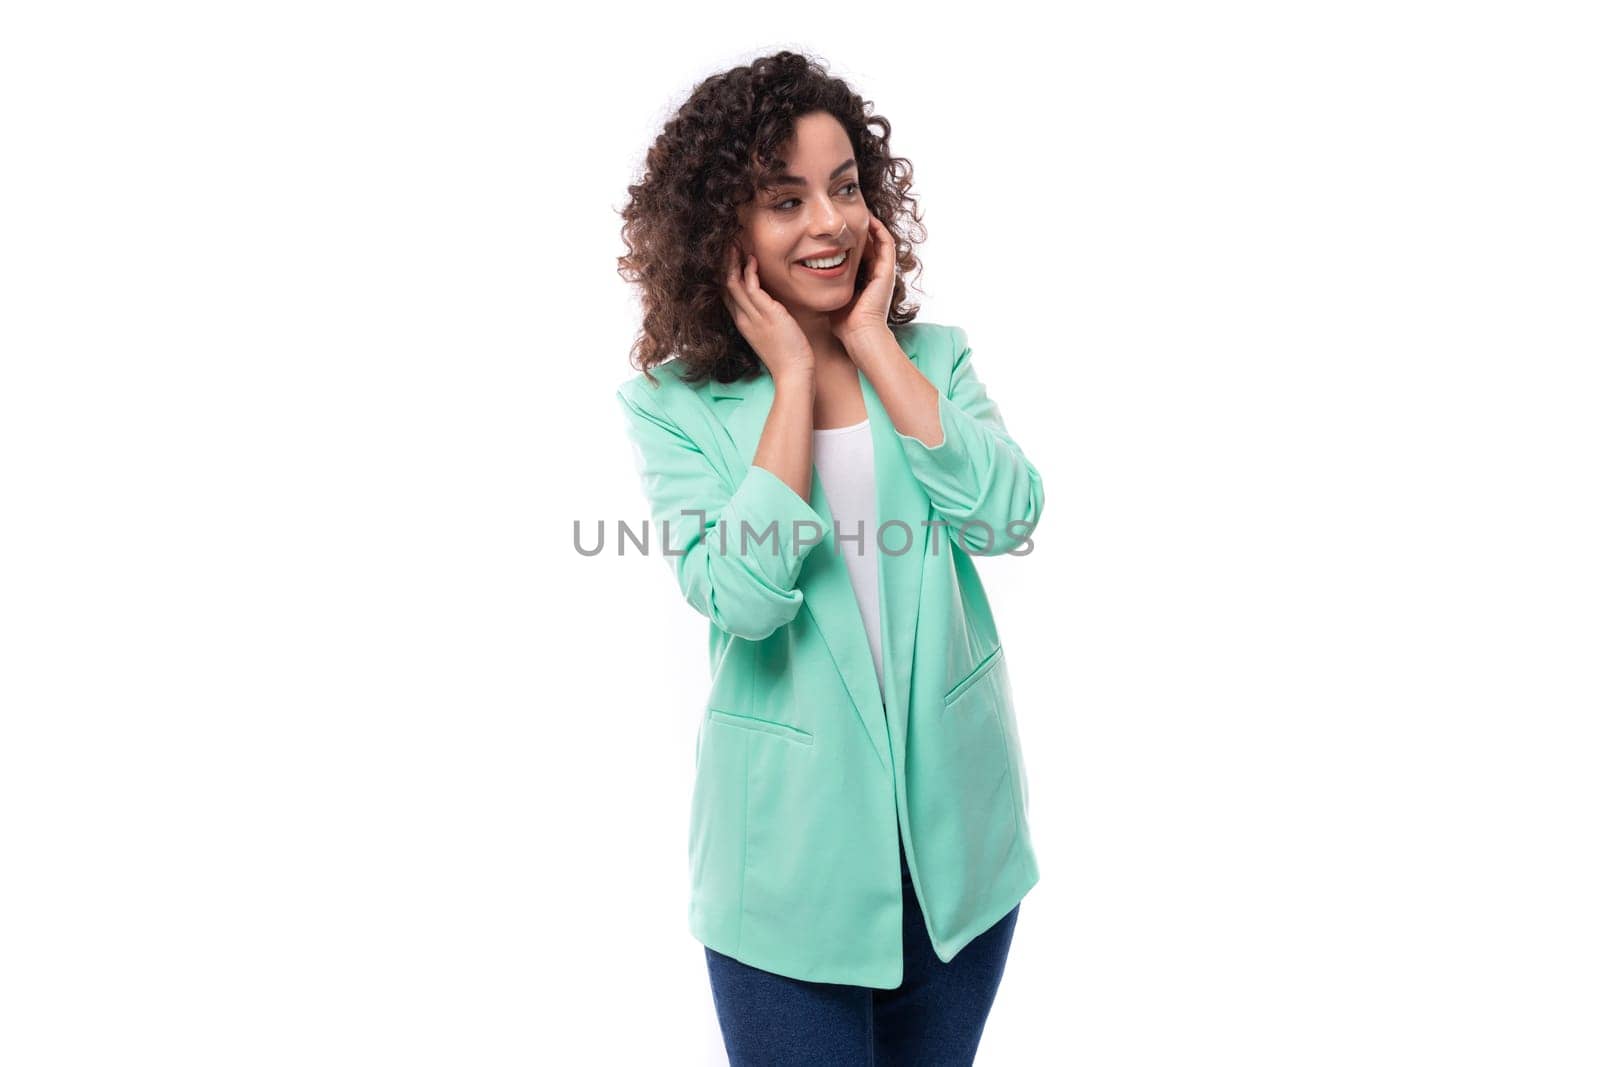 young slim enthusiast successful leader woman with curly black hair on white background by TRMK